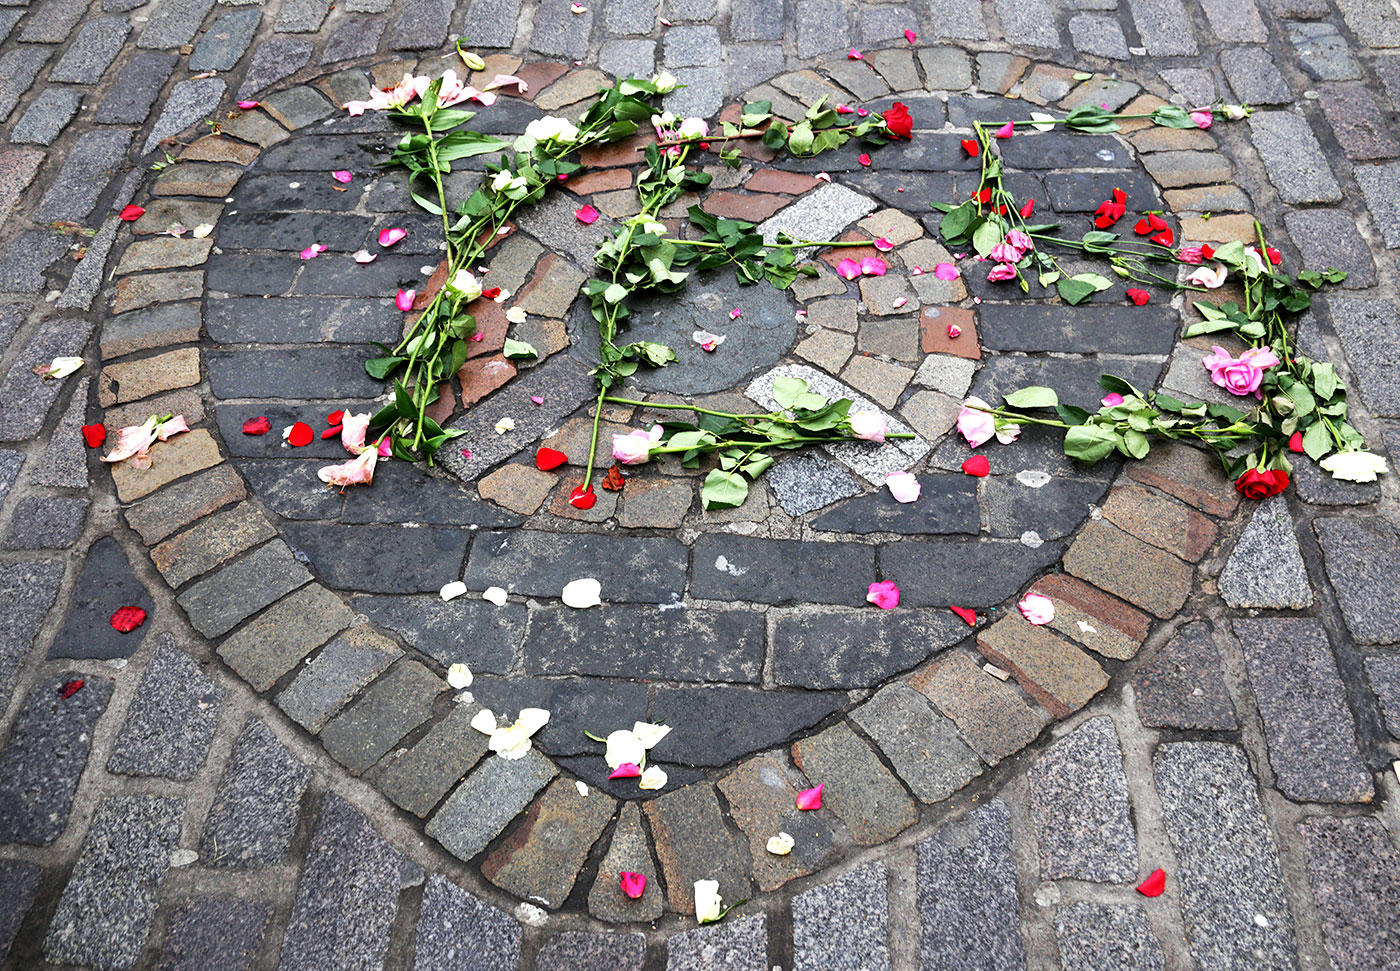 Photos taken in Edinburgh on voting day in the  Scottish Indepemdence Referendum on 18 September 2014  -  The Royal Mile  -  A Floral 'Yes' Message left on the 'Heart of Midlothian, near St Giles' High Church. 